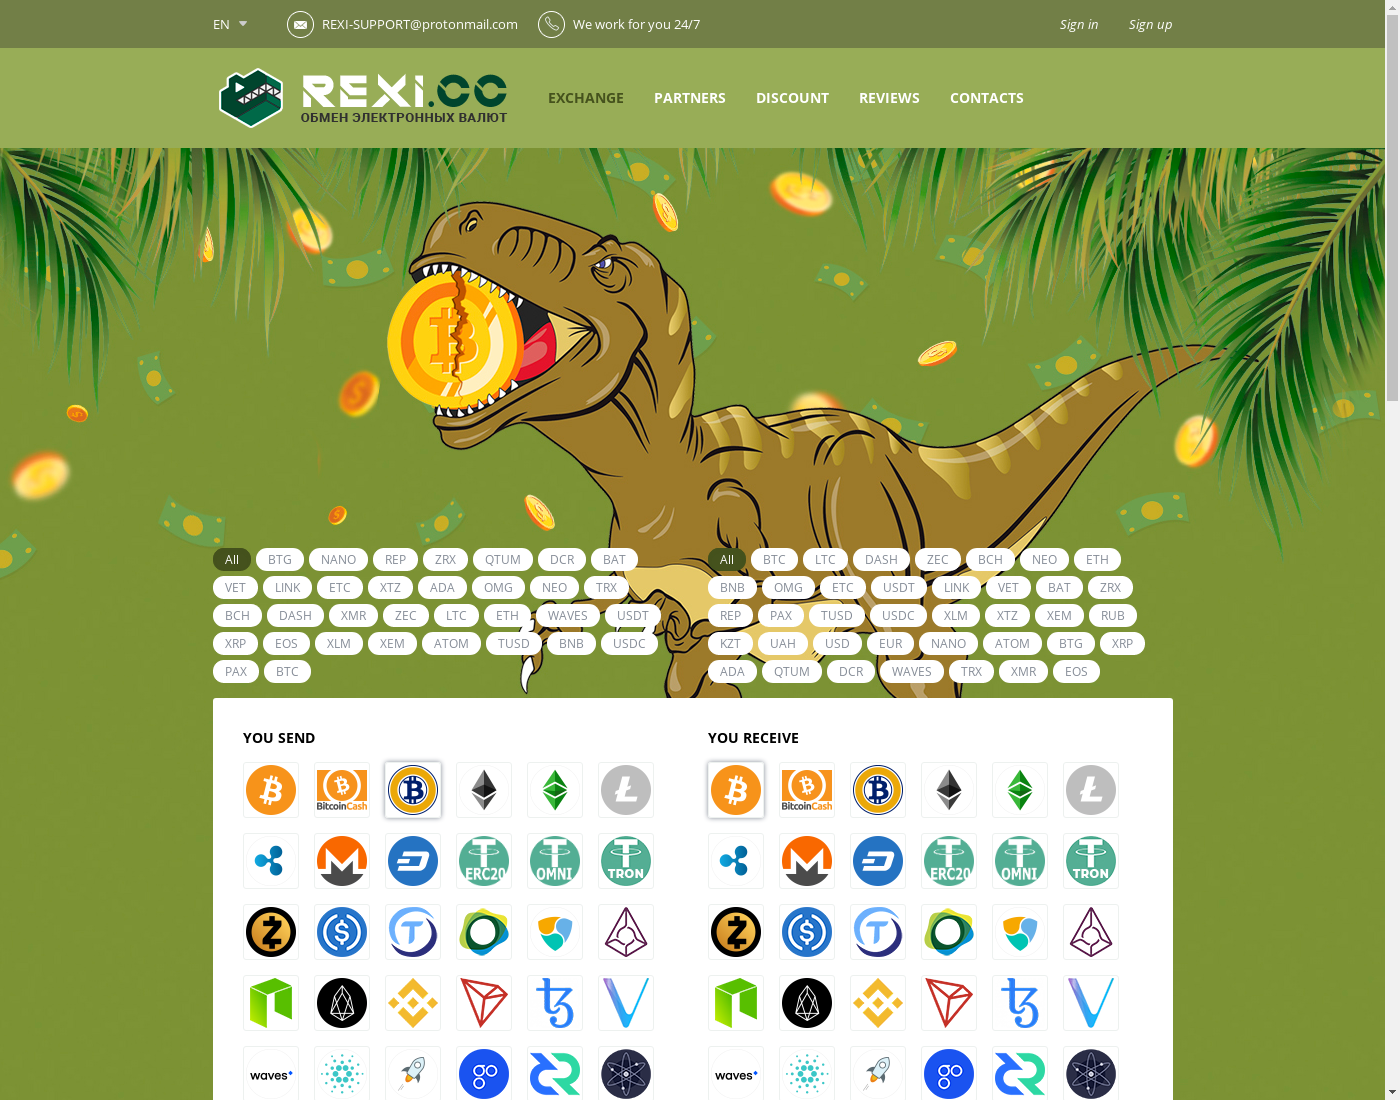 REXI user interface: the home page in English